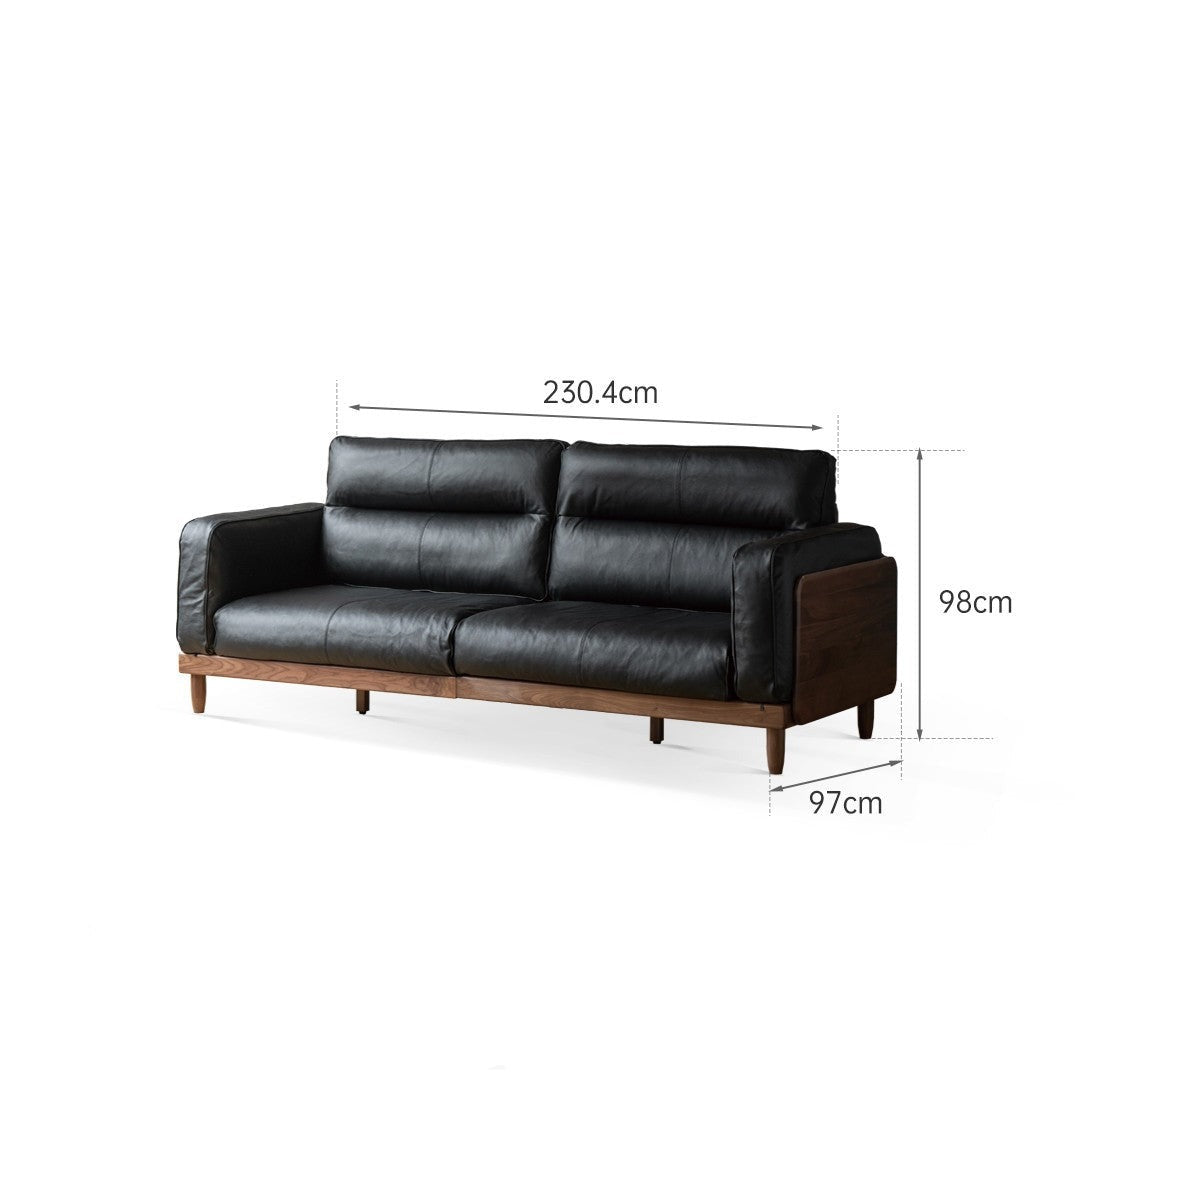 Black walnut solid wood leather top layer yellow cowhide sofa)